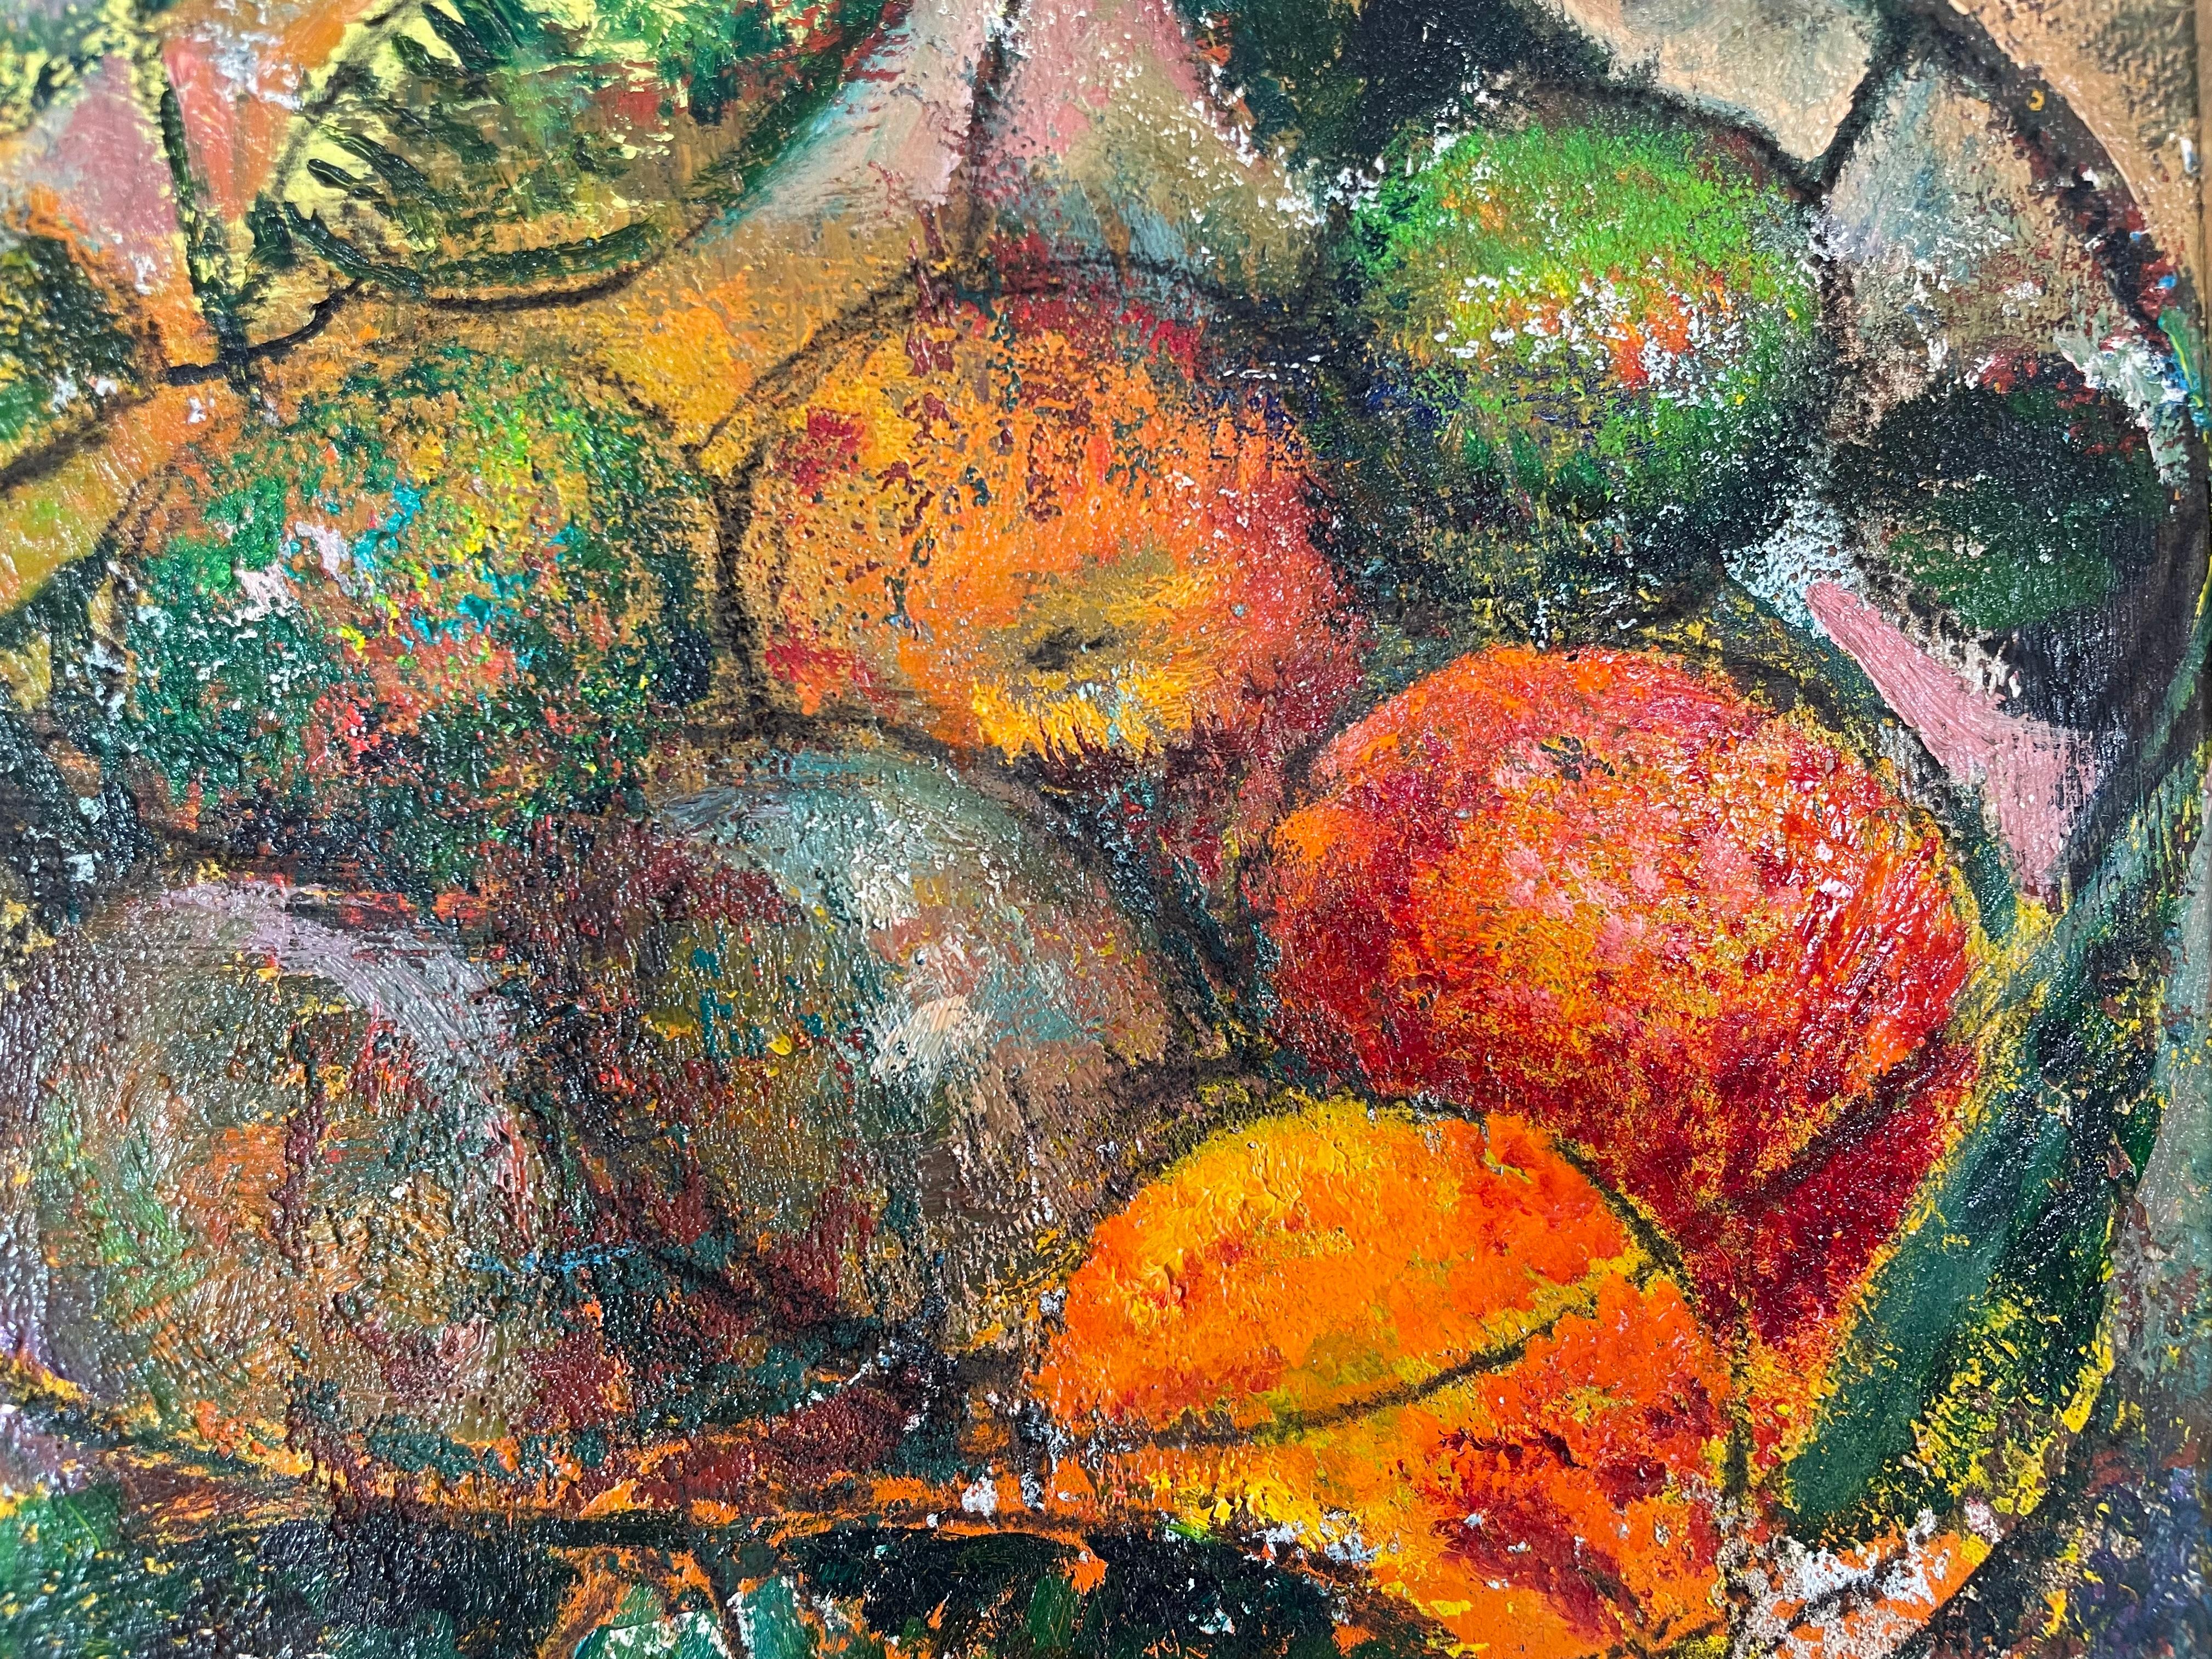 Original oil painting by celebrated, twentieth-century California landscape painter, Ronald Shap. A vibrant still life of a bowl of fruit from the artist's '90s, neo-expressionist / neo-fauvist period. Predominate colors are gold, green and orange.